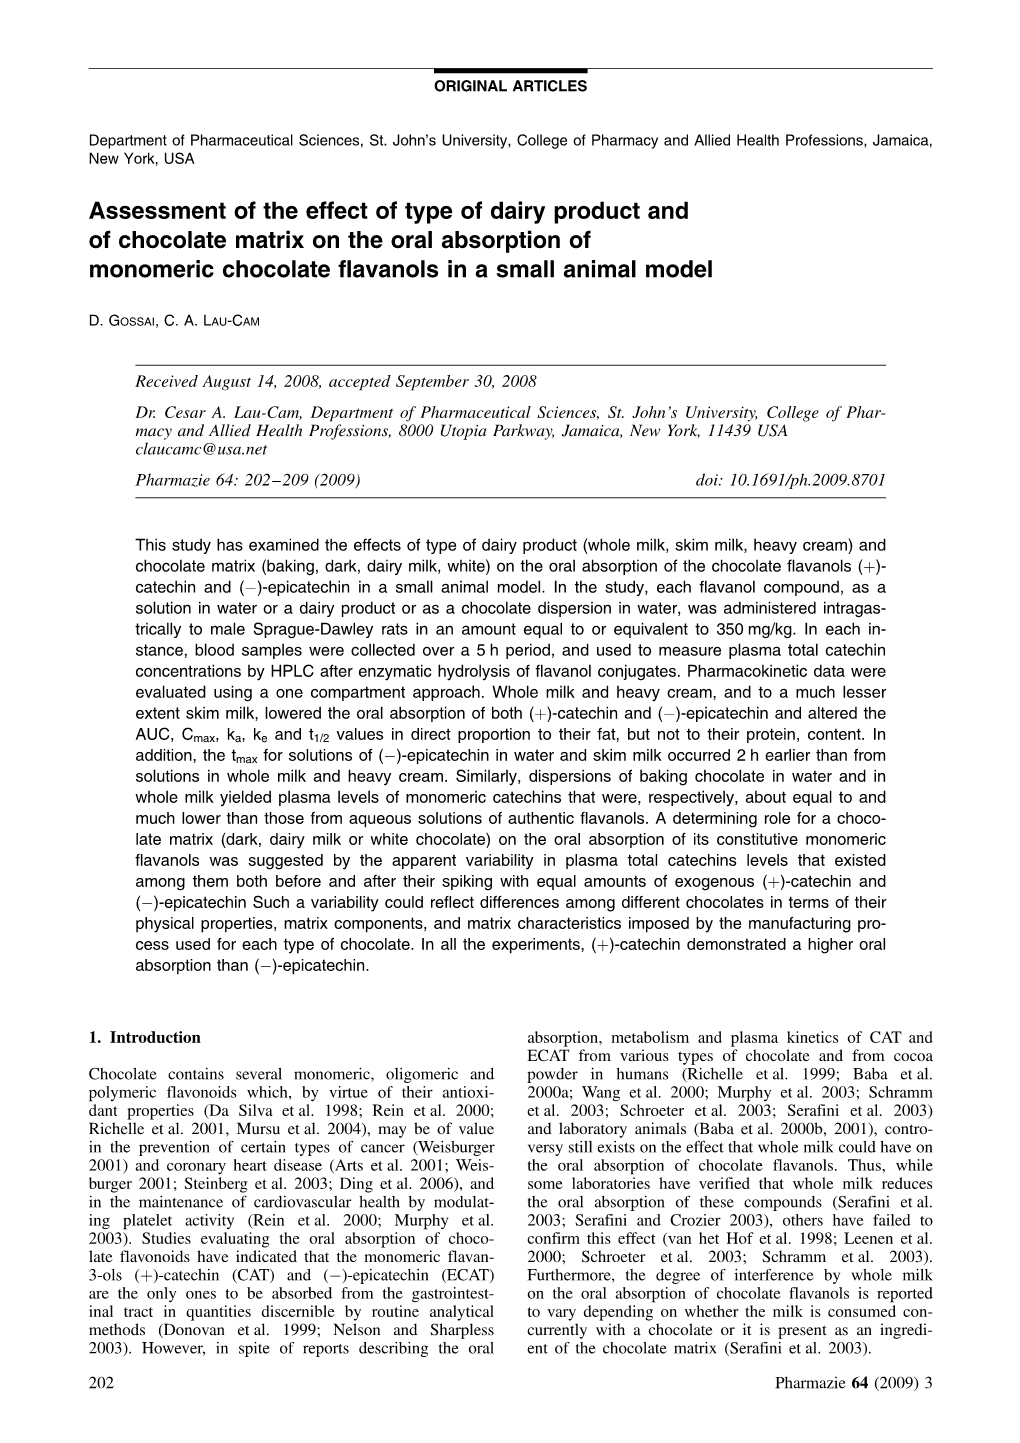 Assessment of the Effect of Type of Dairy Product and of Chocolate Matrix on the Oral Absorption of Monomeric Chocolate Flavanols in a Small Animal Model